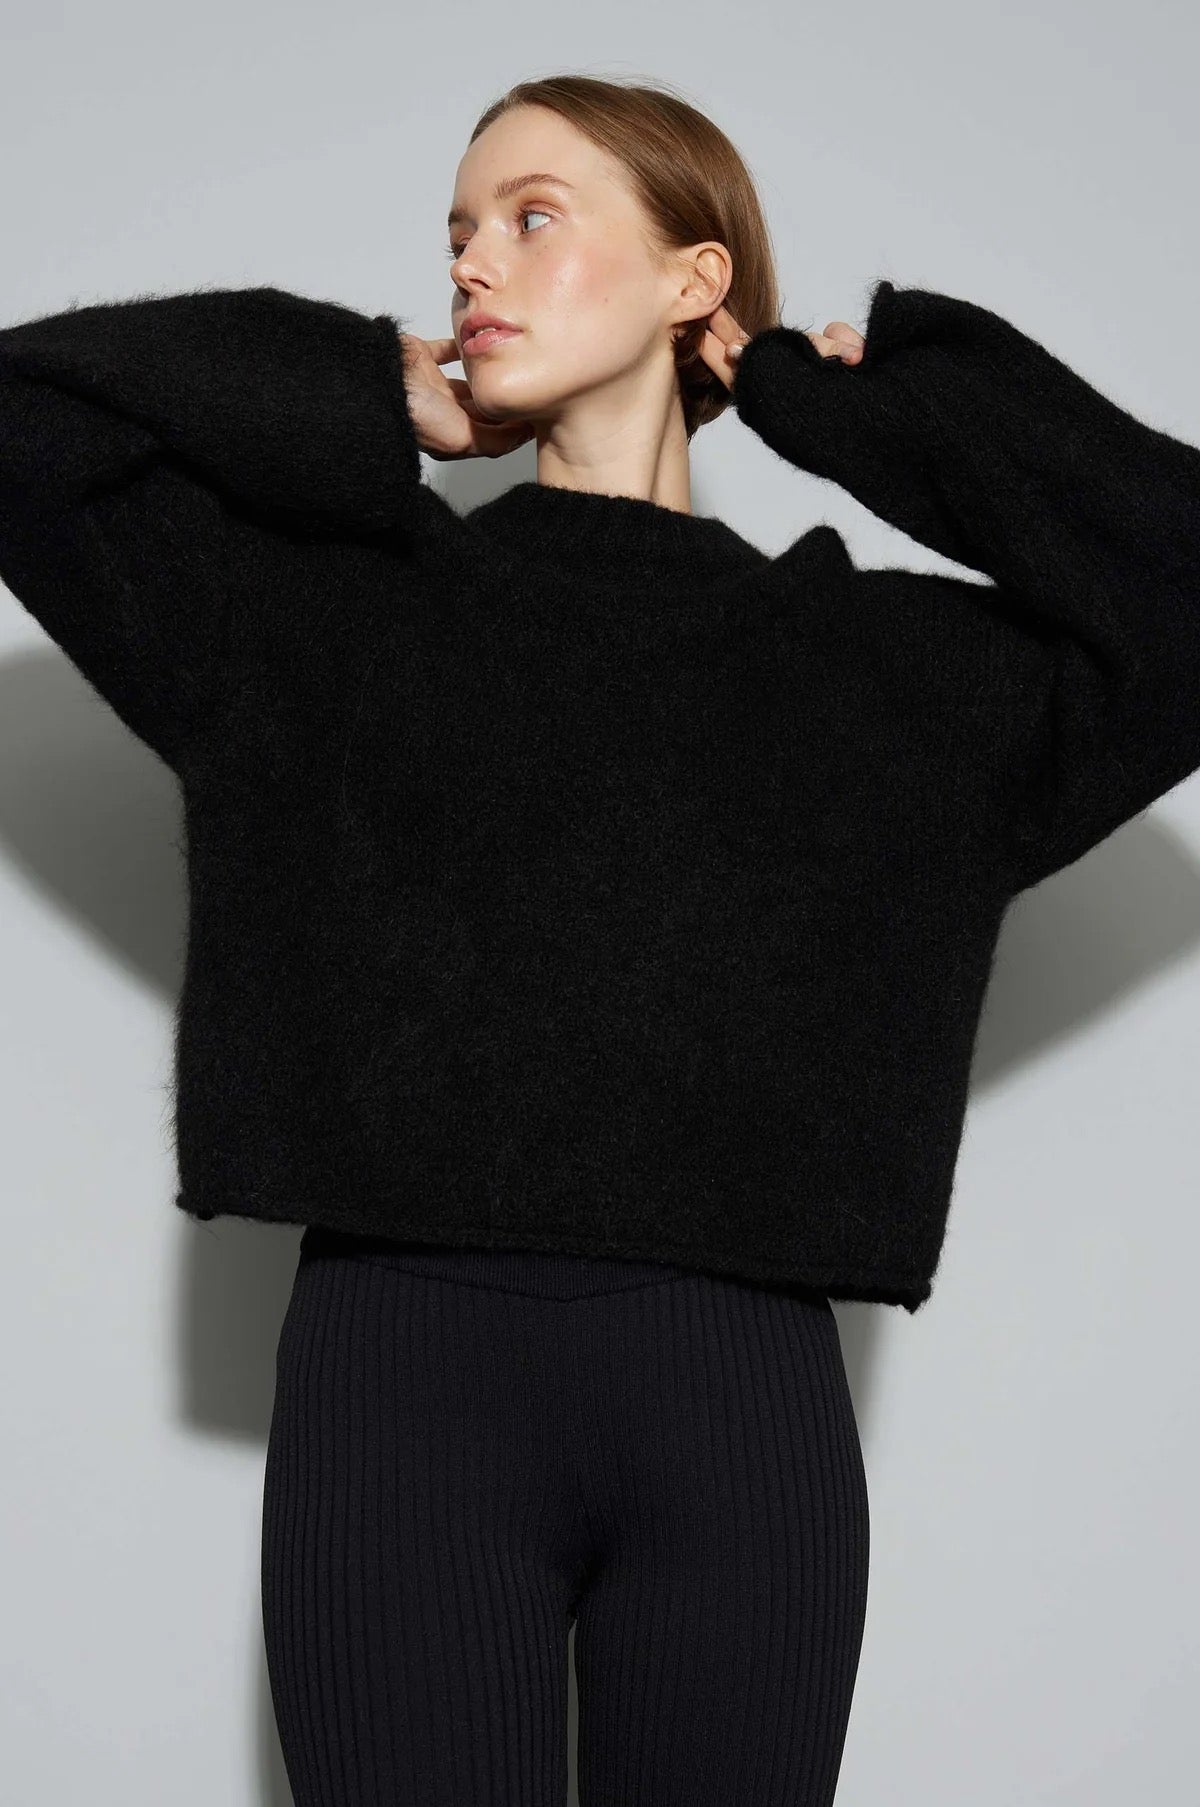 Oval Square Cult knit crewneck oversized sweater black | Pipe and Row